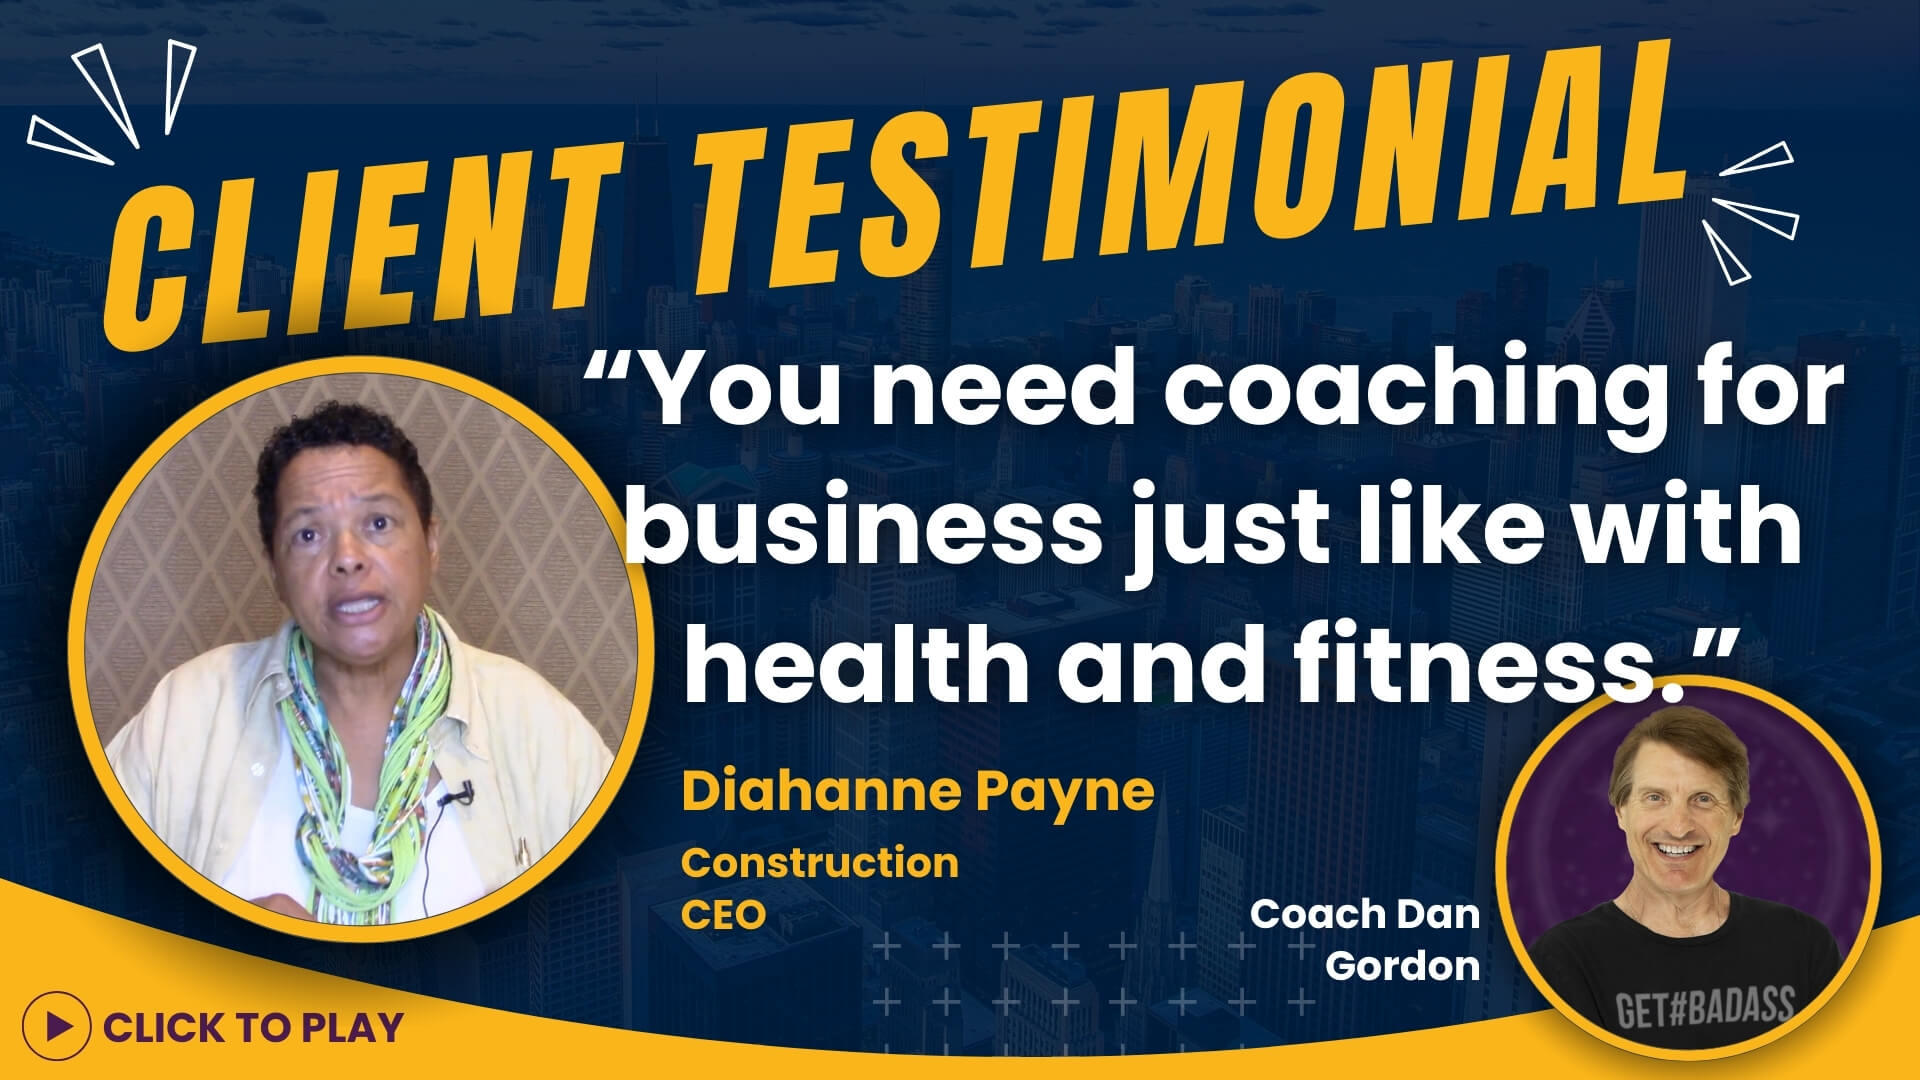 Diahanne Payne, a construction industry CEO, advocates for the necessity of business coaching akin to health and fitness with Coach Dan Gordon, alongside an interactive 'Click to Play' button.